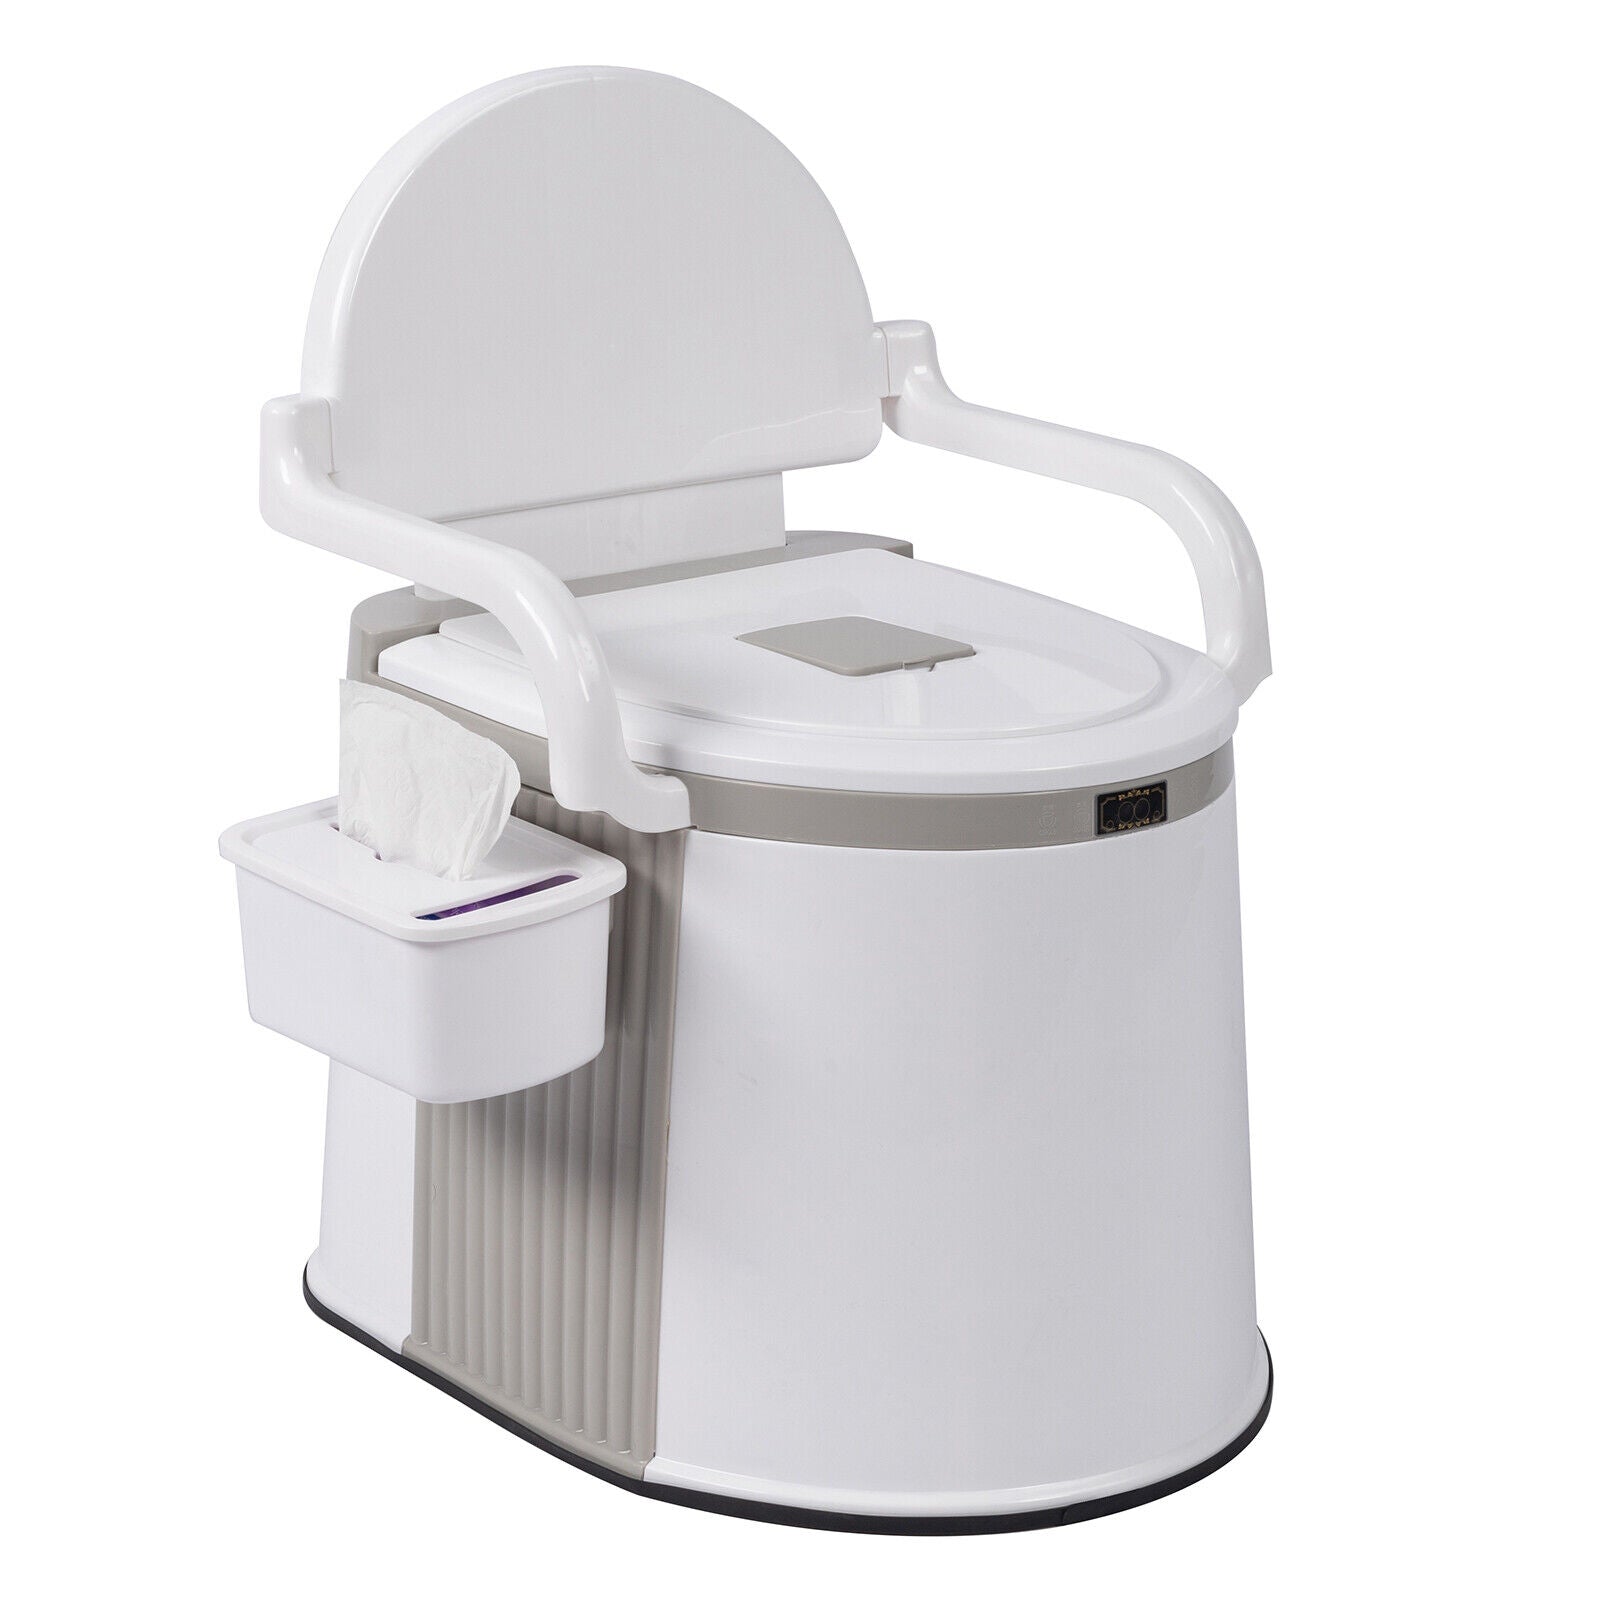 3 of Portable Commode Toilet